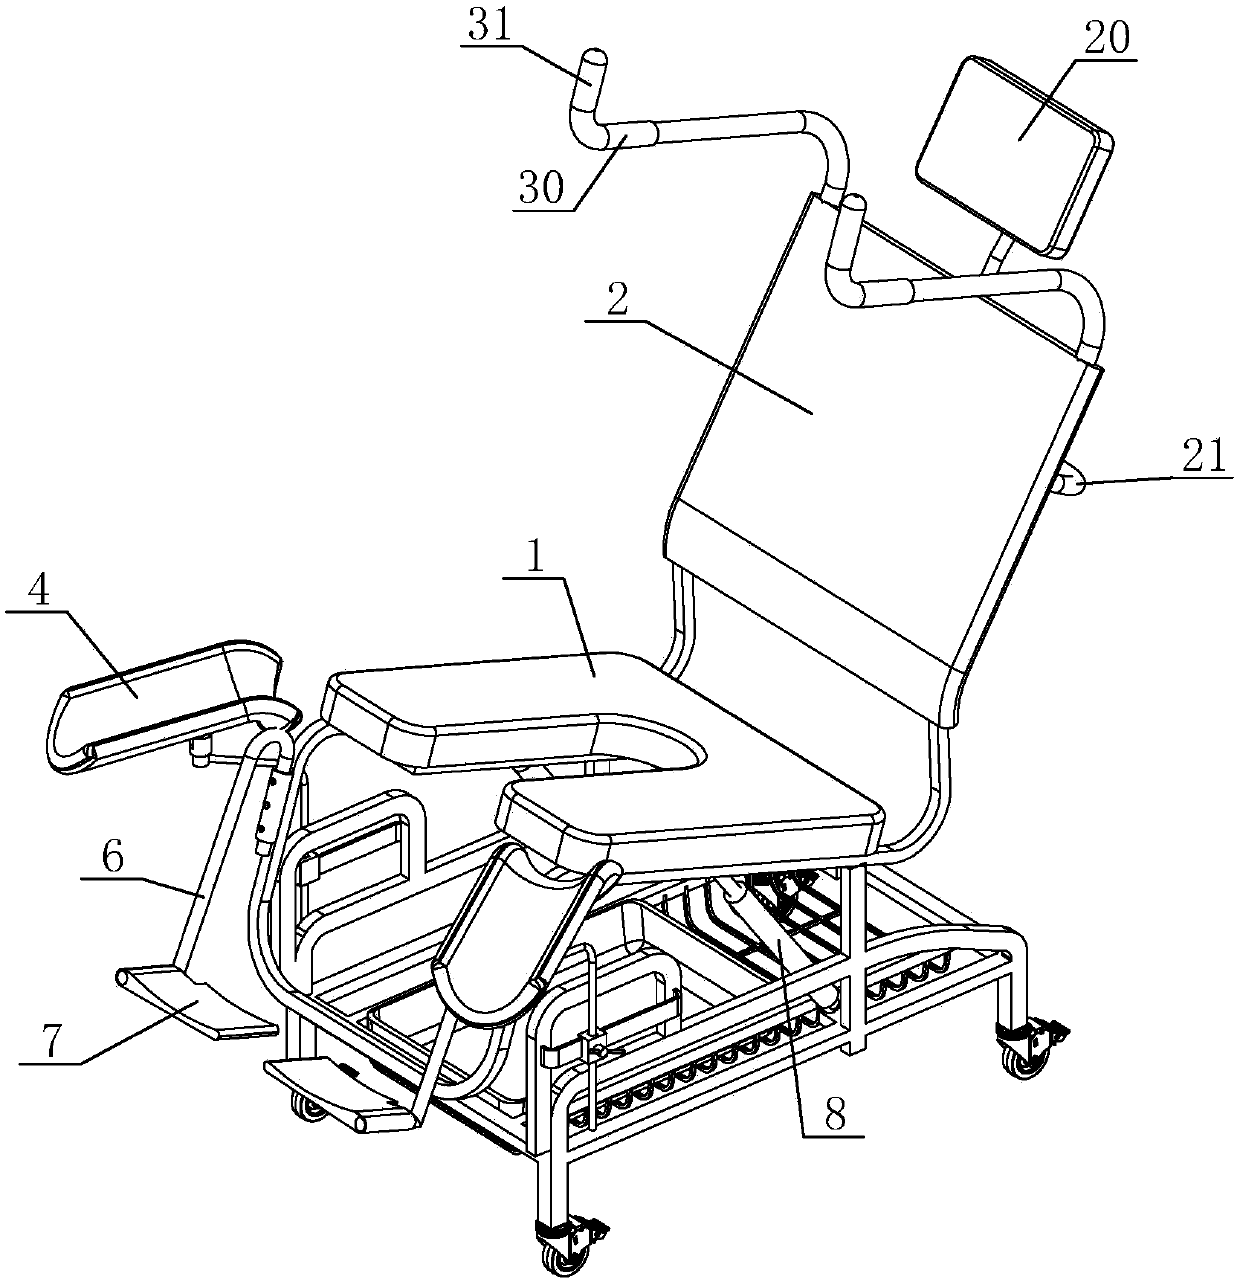 Sitting-type delivery chair with adjustable inclination angles